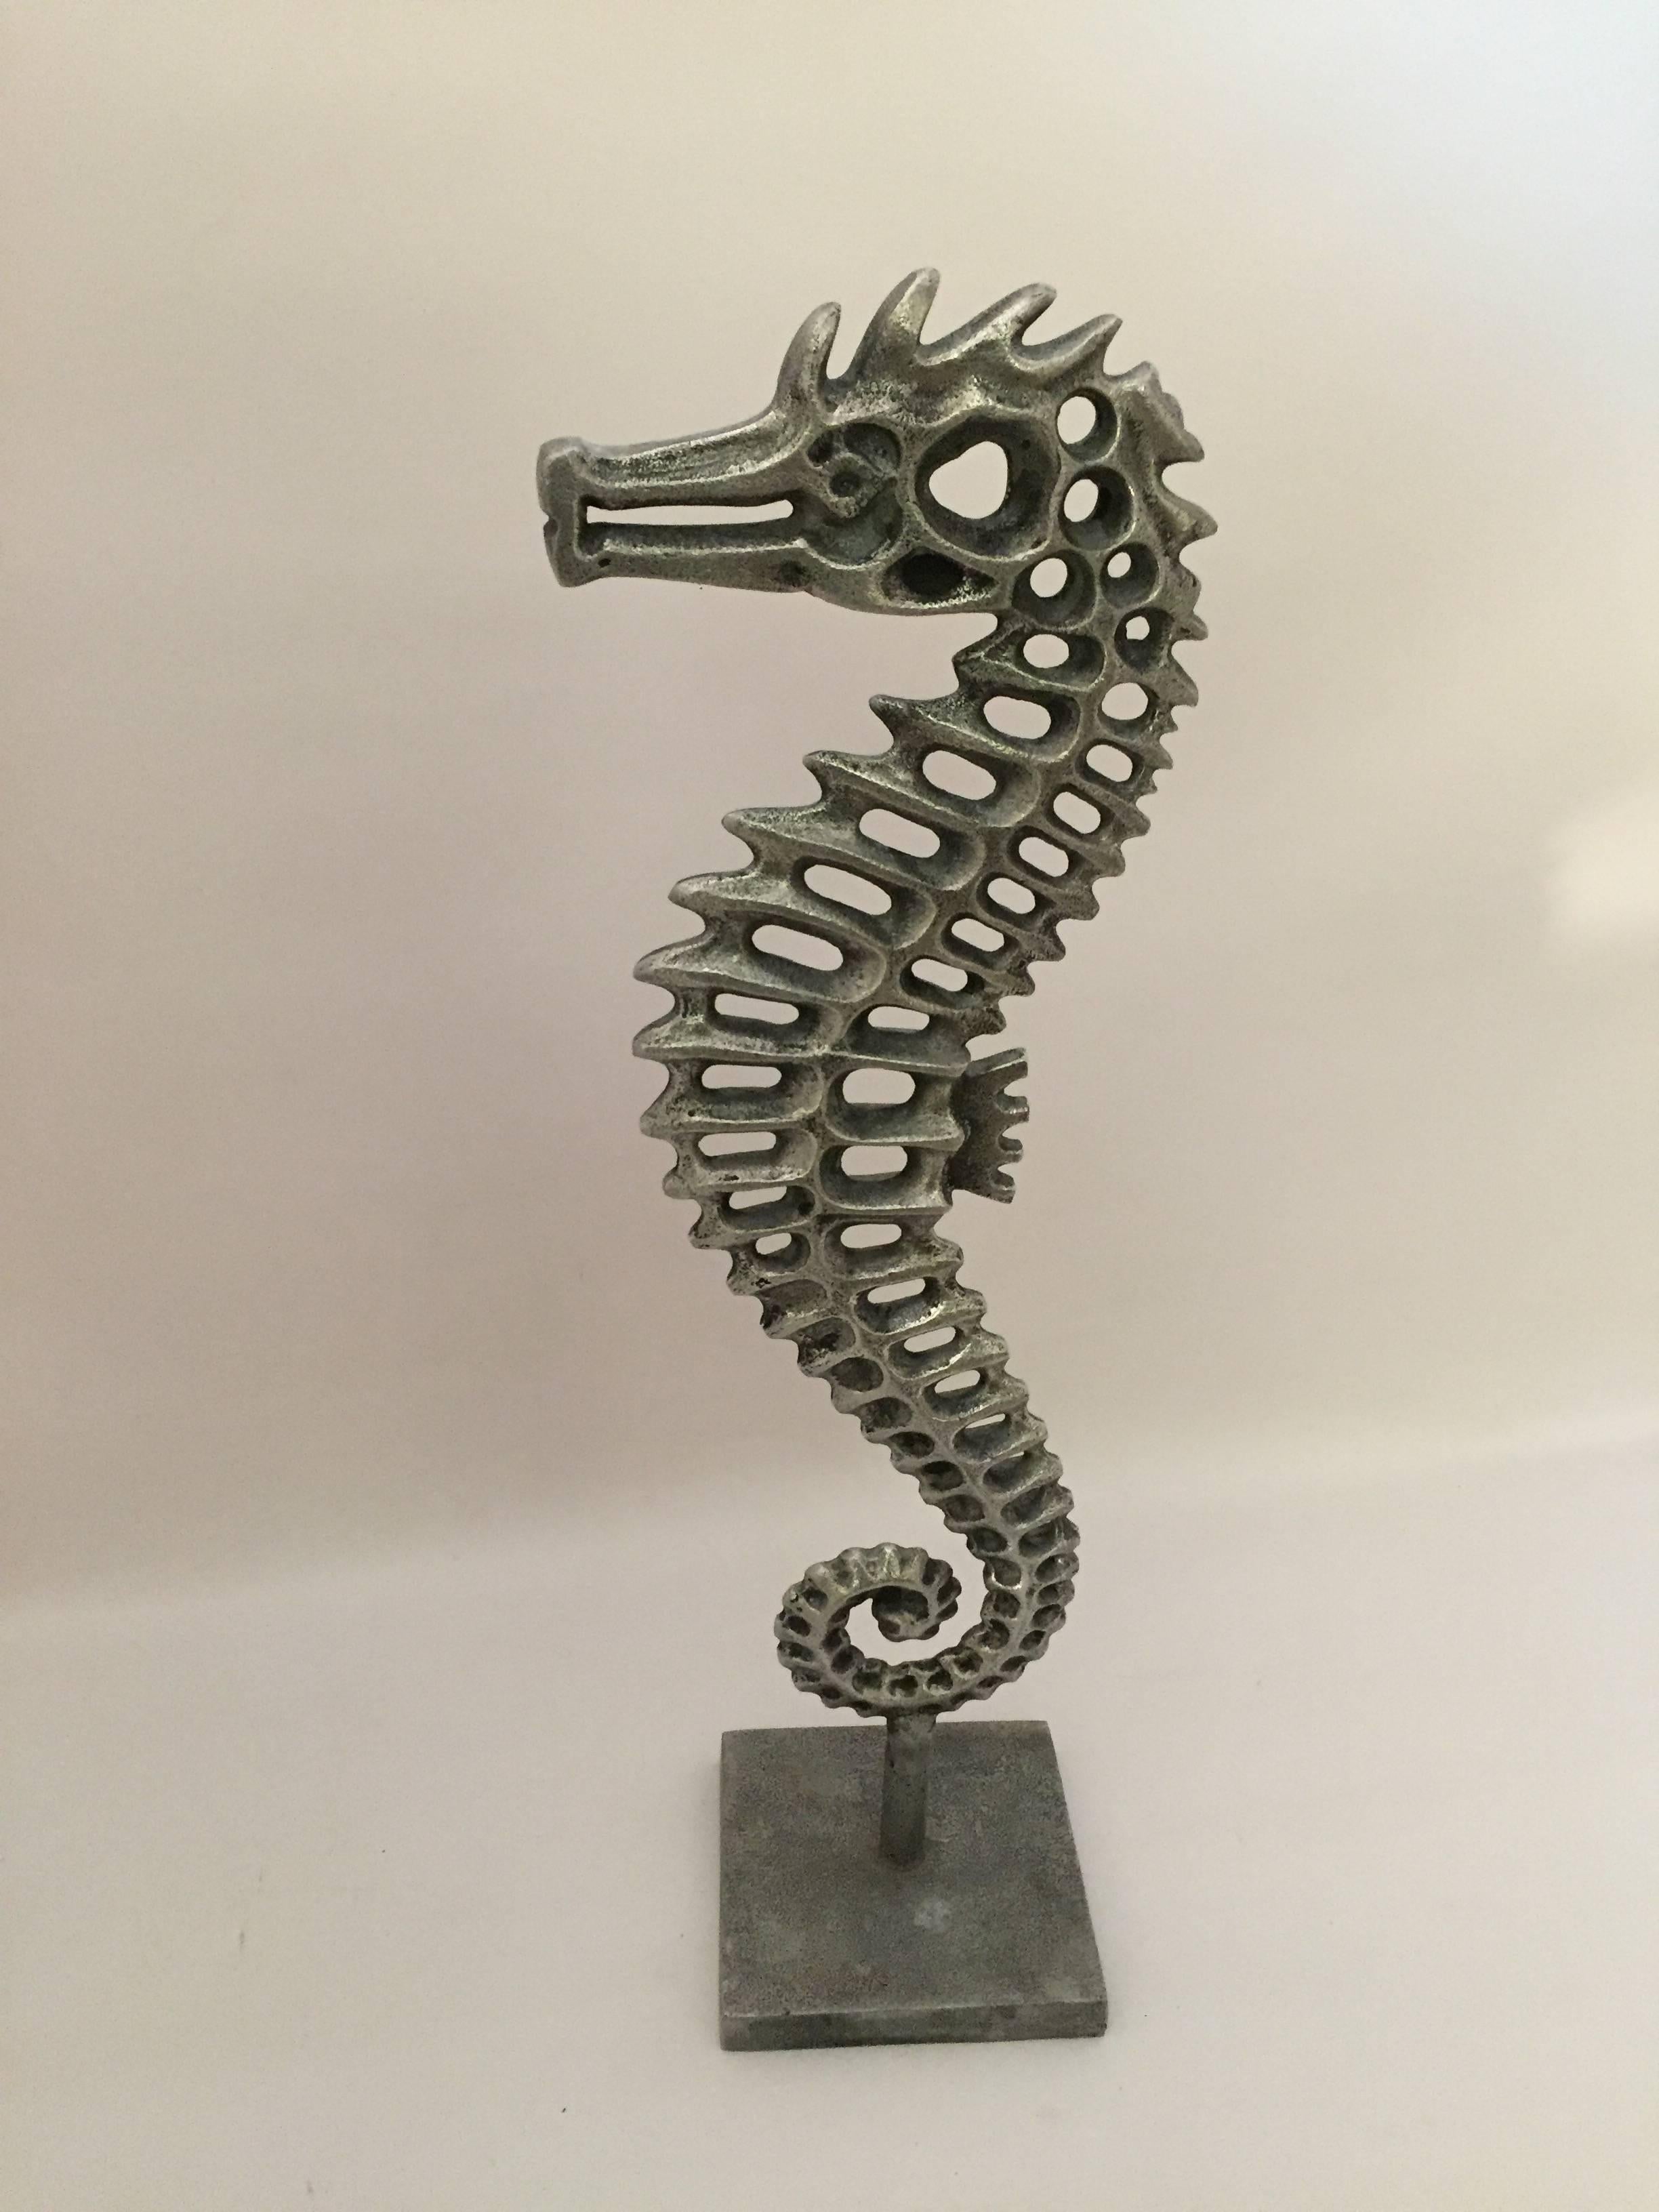 Wonderful cast aluminum seahorse sculpture in the style of Don Drumm. Unsigned. Very good original condition, circa 1970.